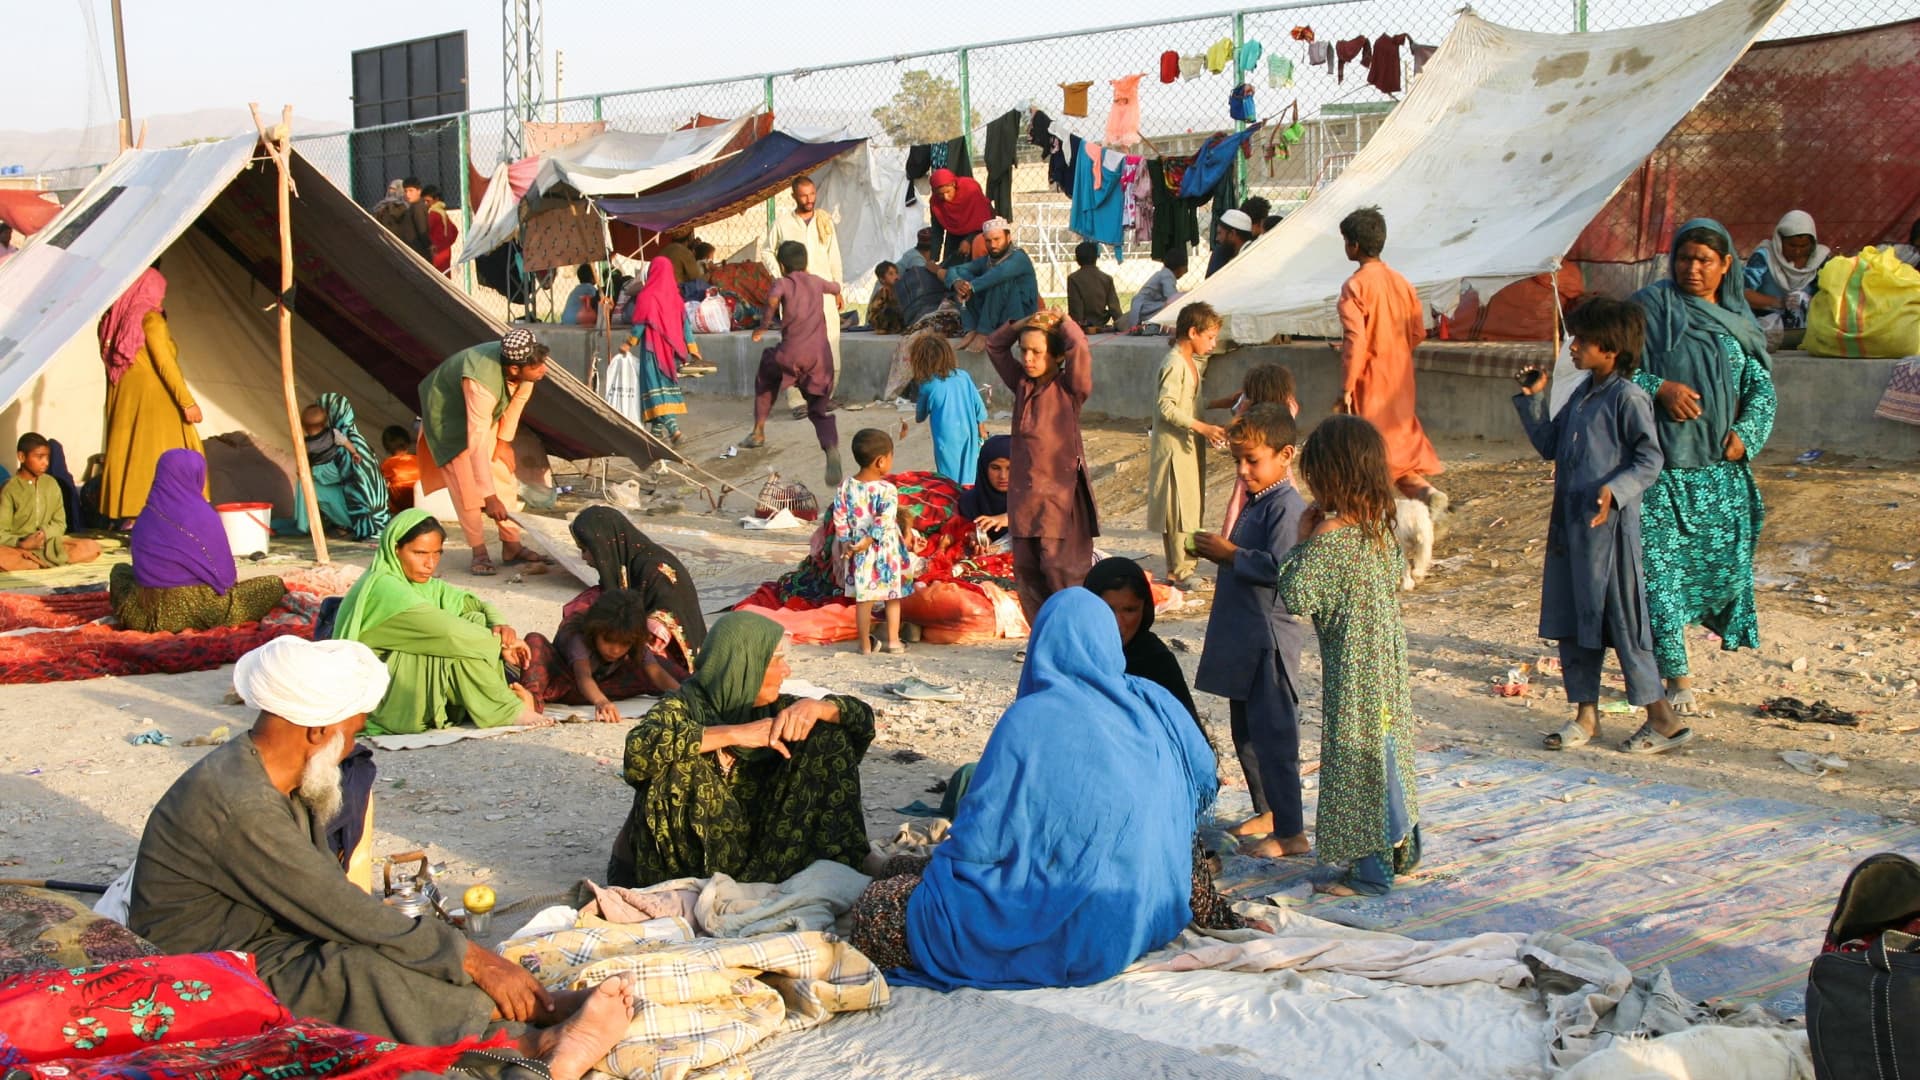 Families who arrived from Afghanistan are seen at their makeshift tents as they take refuge near a railway station in Chaman, Pakistan September 1, 2021.